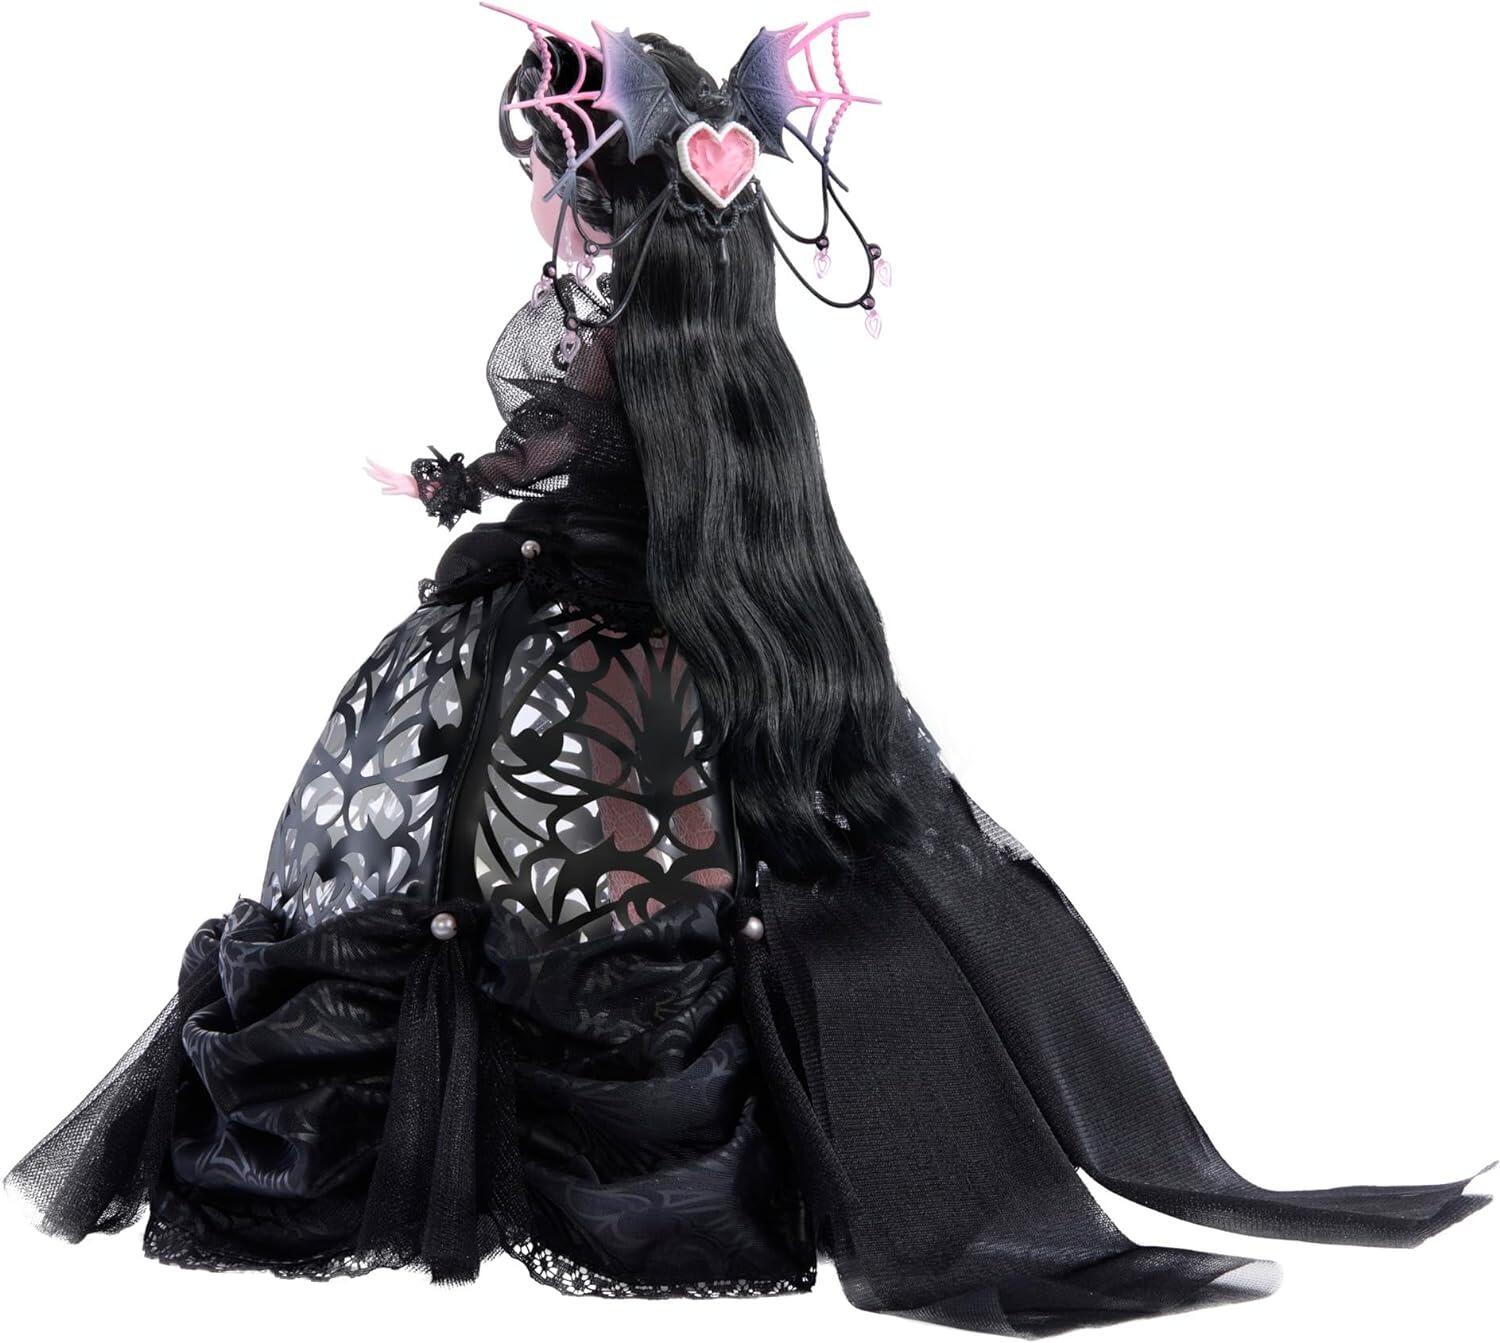 Monster High Draculaura Doll, Vampire Heart in Extravagant Black Ballgown with Elegant Headpiece and Accessories